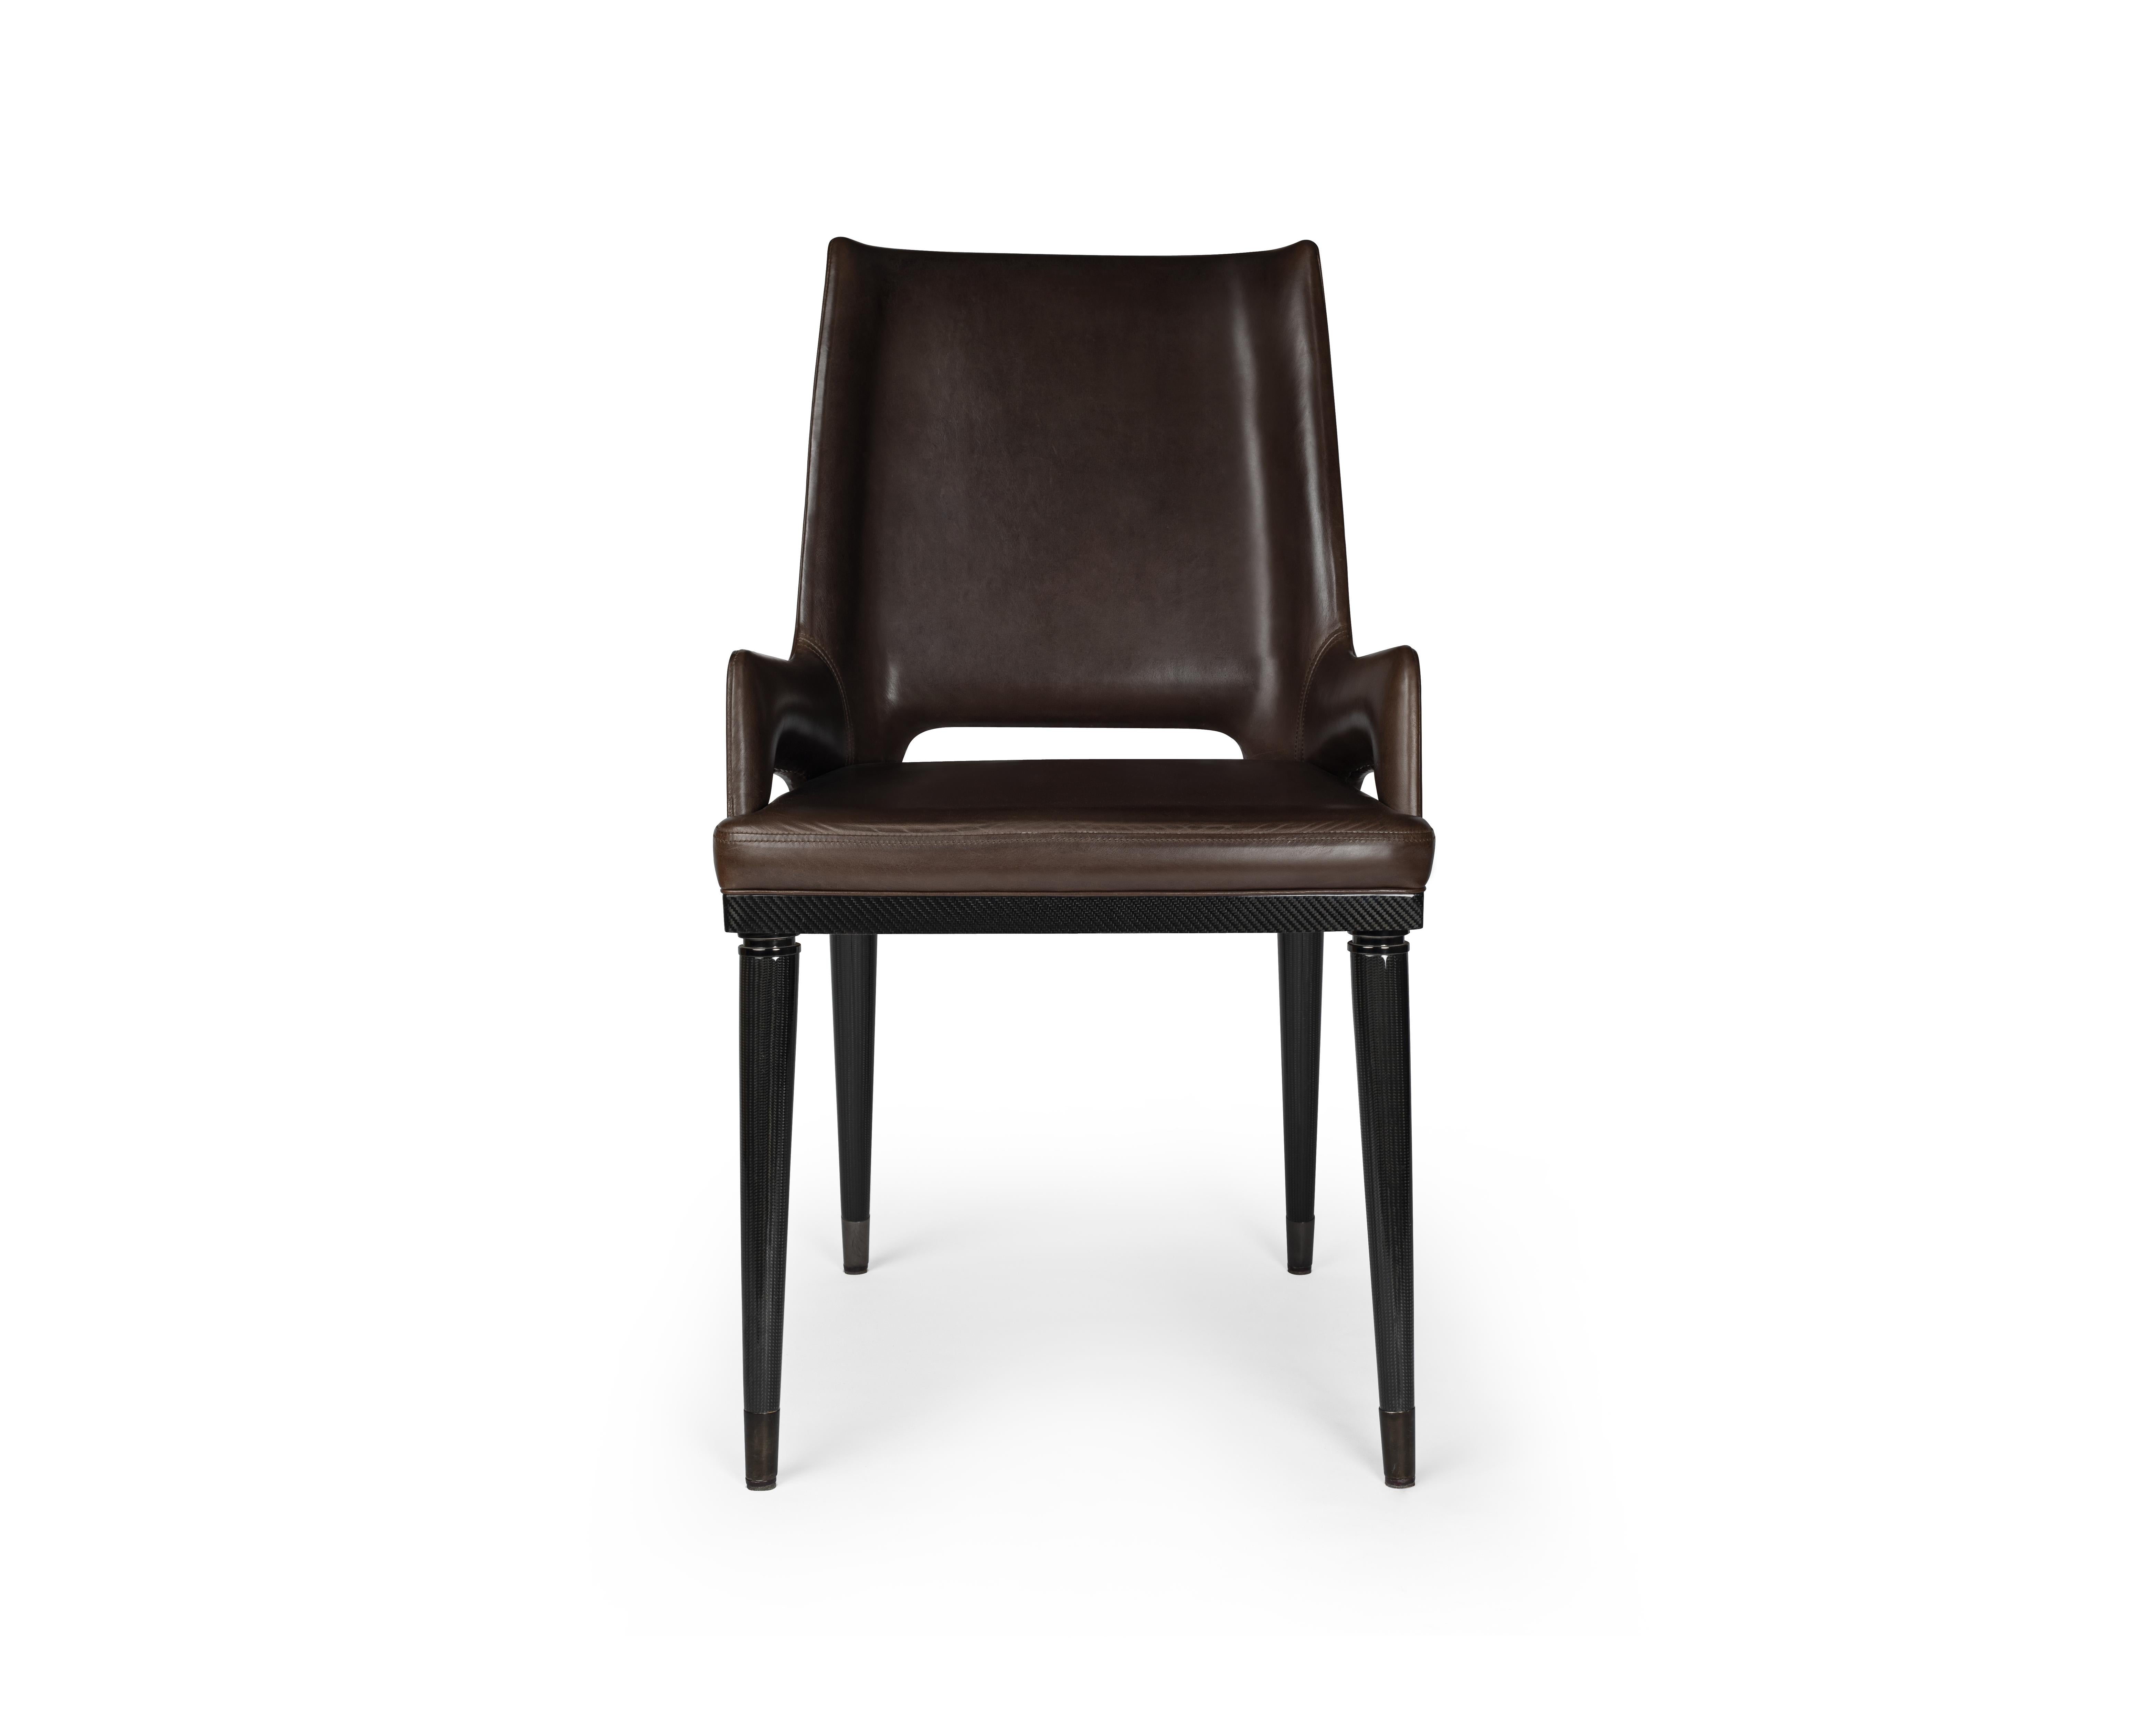 Leather Irving carver chair by Madheke
Dimensions: W 56 D 51 H 91 cm
Materials: leather, carbon fibre, metal

Carbon fibre chair back with upholstered seat. Seamless carbon fibre leg detailed with metal trim.

Reflecting the finest in